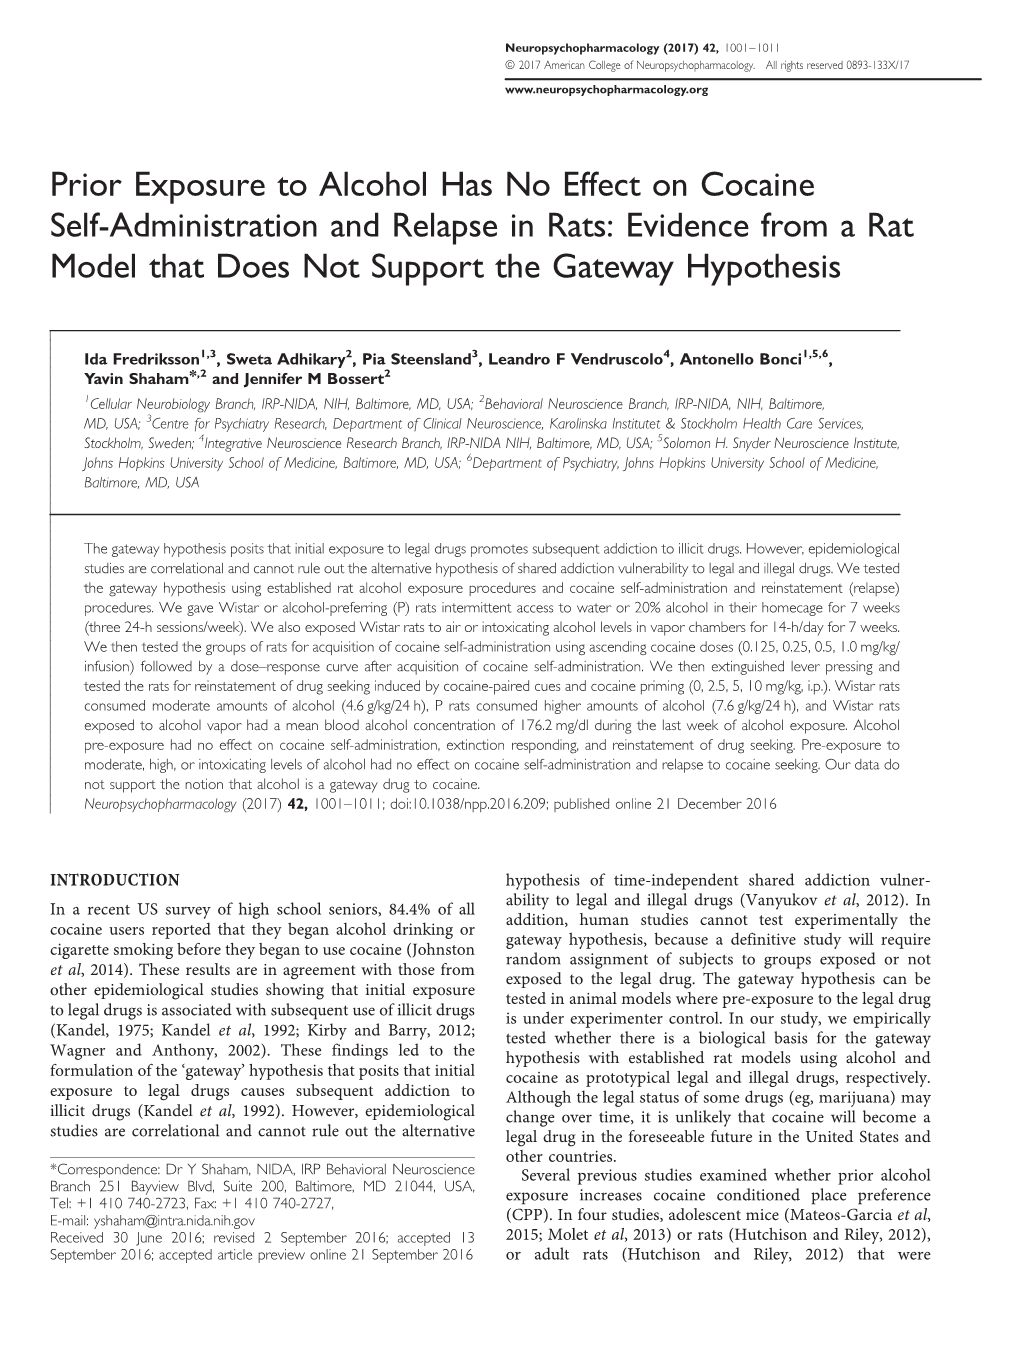 Prior Exposure to Alcohol Has No Effect on Cocaine Self-Administration and Relapse in Rats: Evidence from a Rat Model That Does Not Support the Gateway Hypothesis